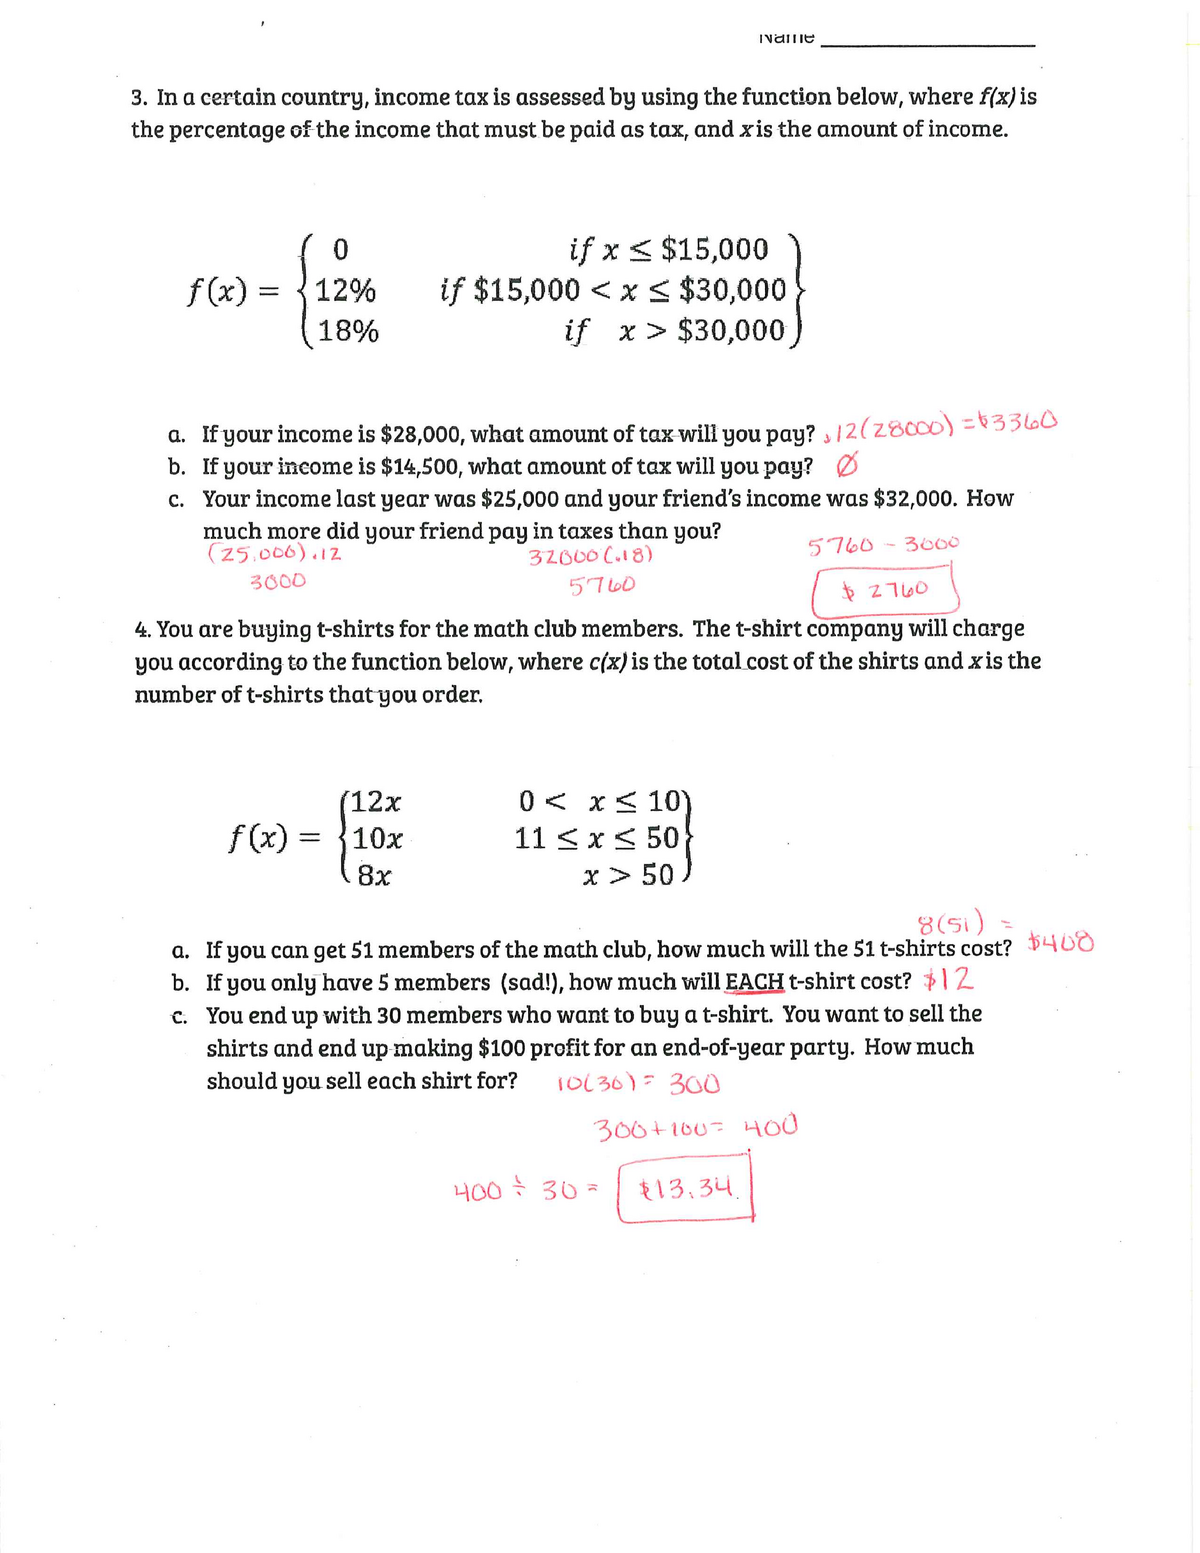 piecewise function problem solving examples with answers pdf